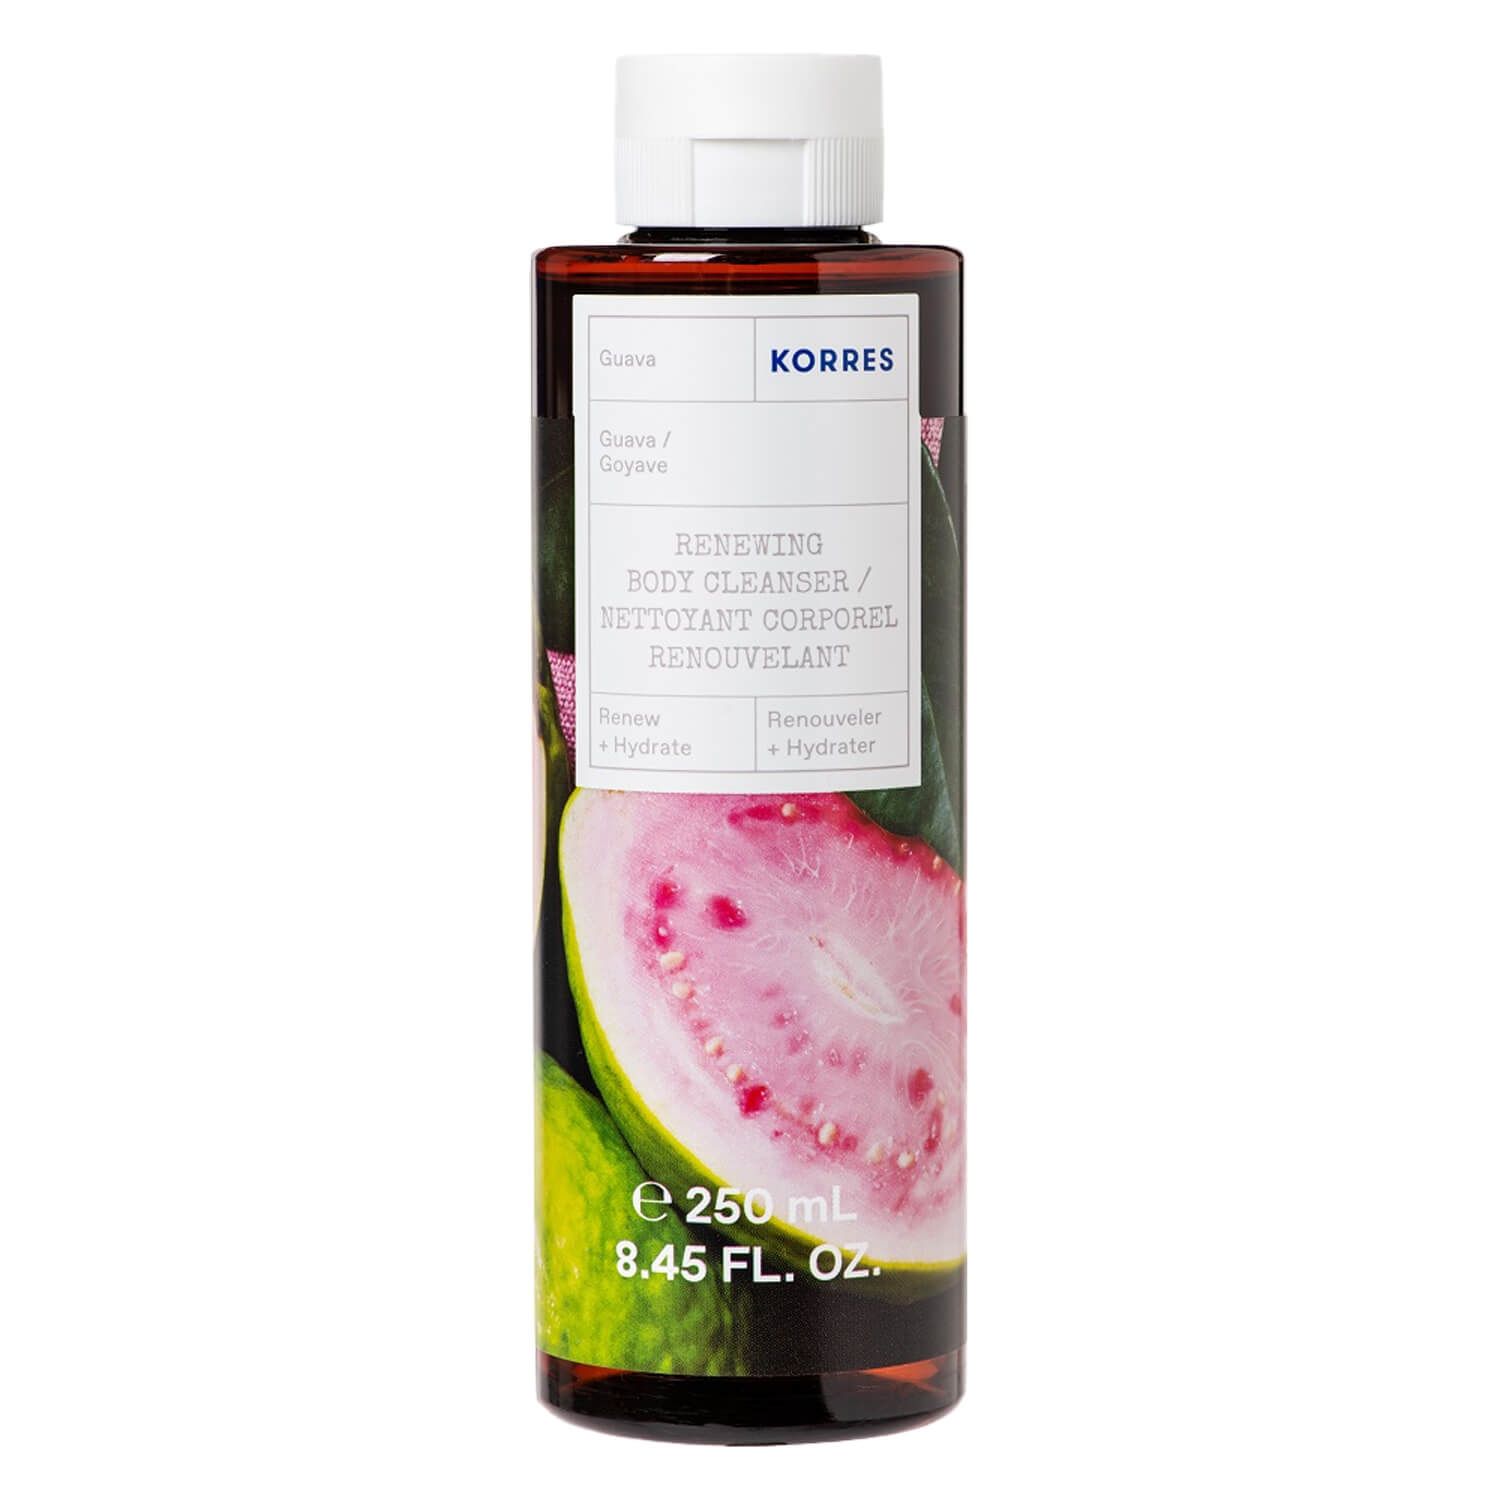 Product image from Korres Care - Guava Renewing Body Cleanser